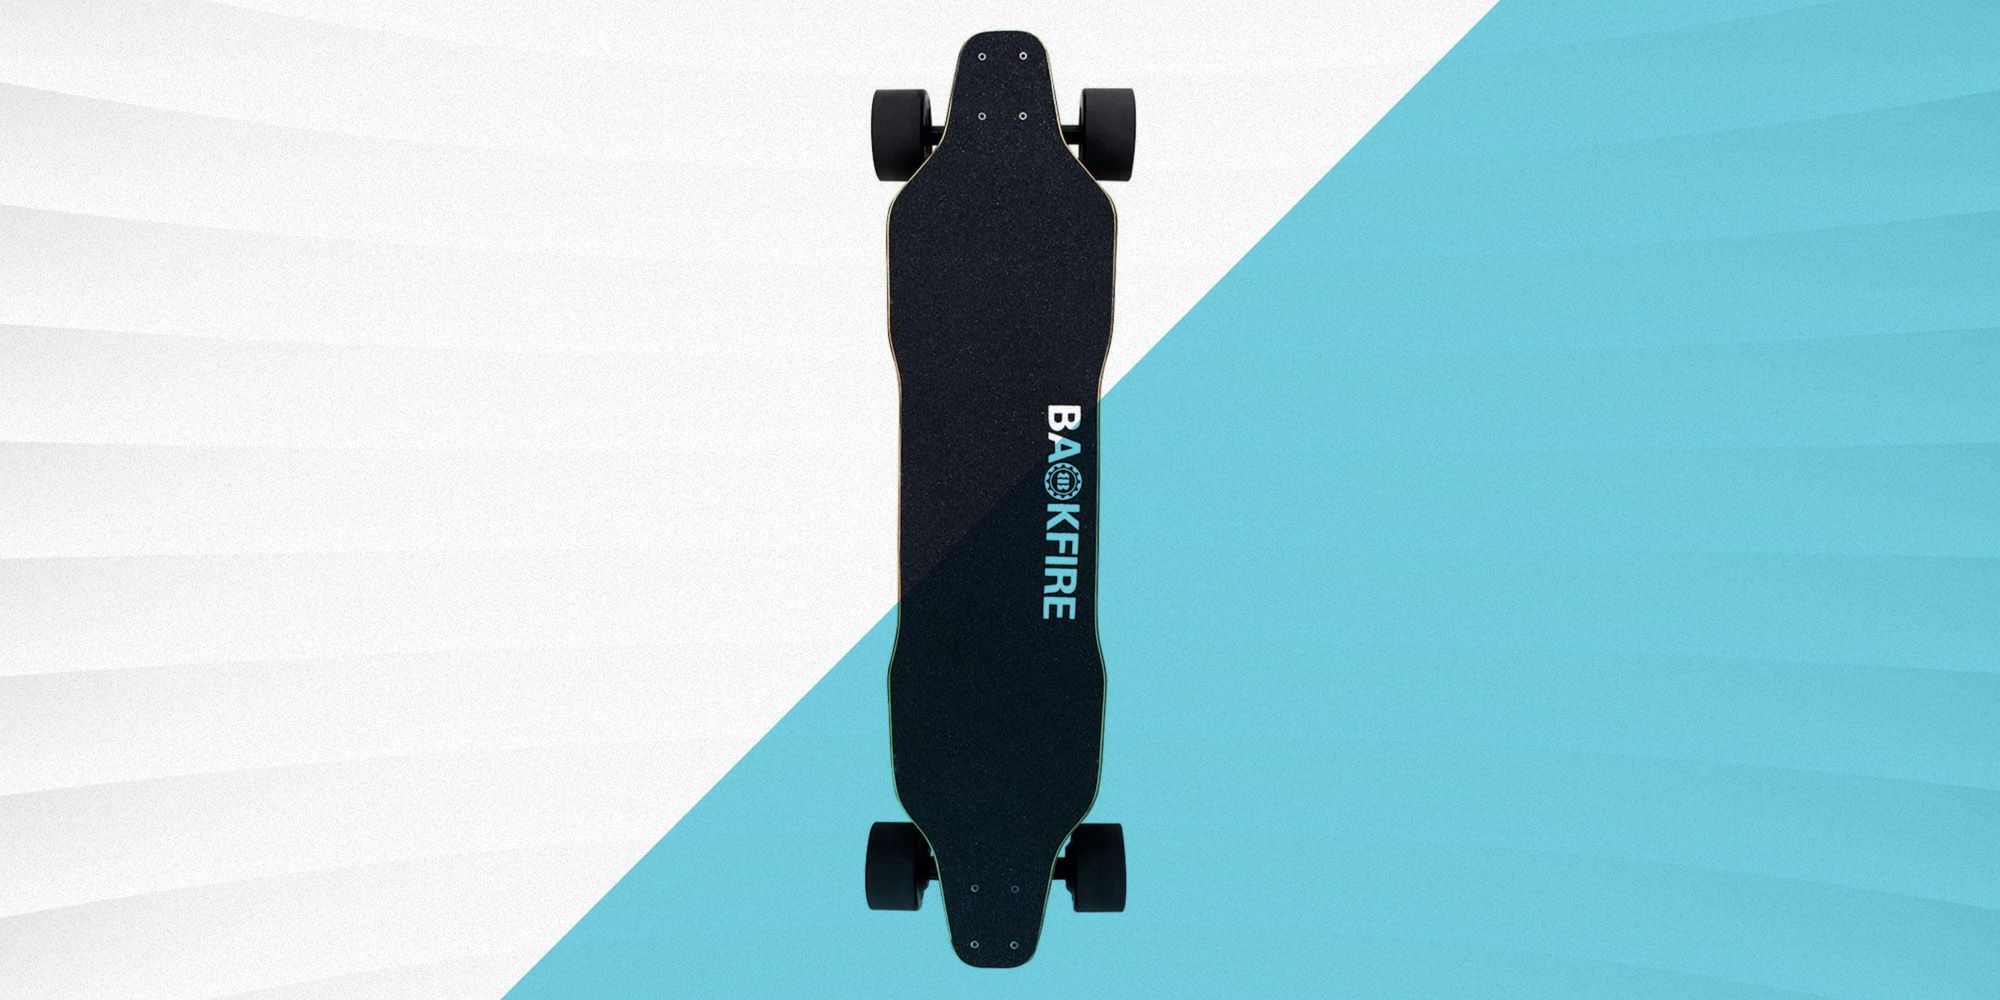  MEEPO Electric Skateboard, 28 MPH Top Speed, 330 LBS Load  Capacity with Remote, Maple Cruiser for Adults and Teens, Mini 5, Black :  Sports & Outdoors